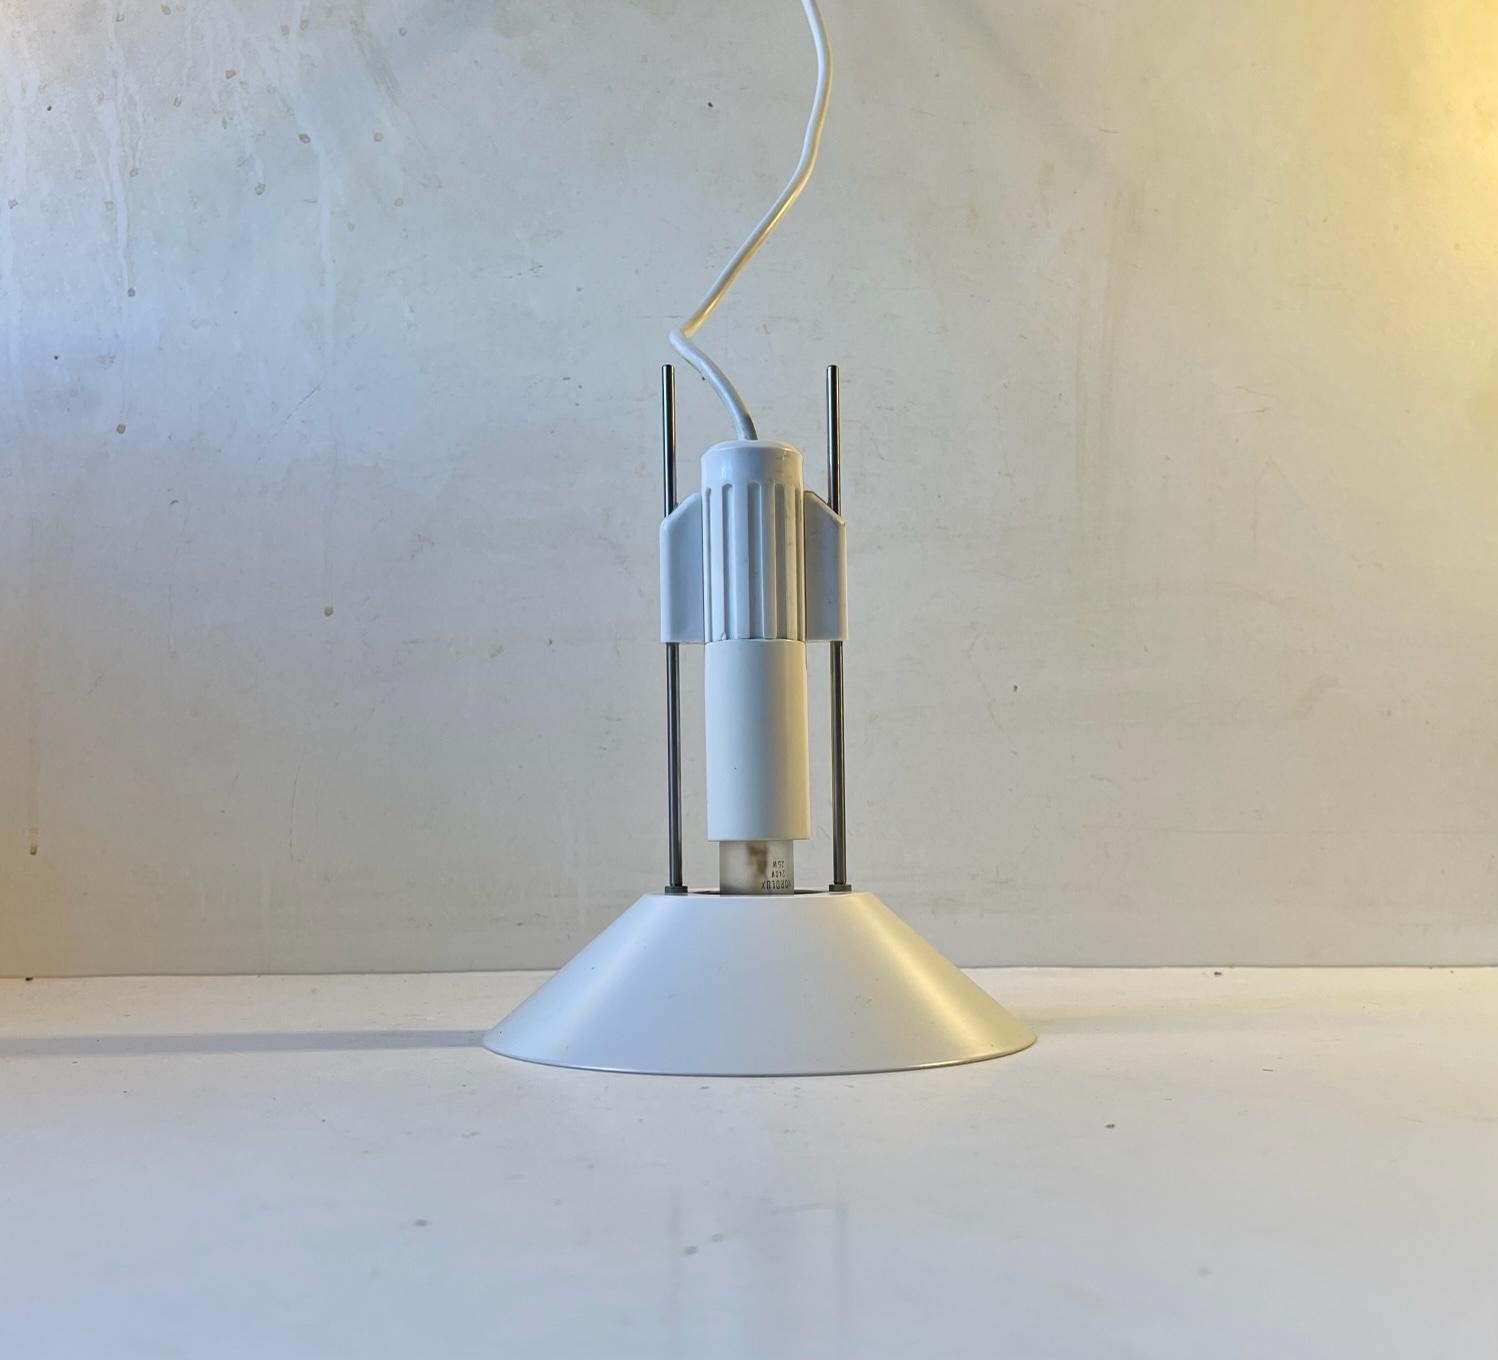 A vintage white pendant designed and manufactured by Lyfa in Denmark during the 1970s. The bulb can be height-adjusted allowing you to change the intensity of the light. Measurements: H: 21 cm, D: 17 cm.